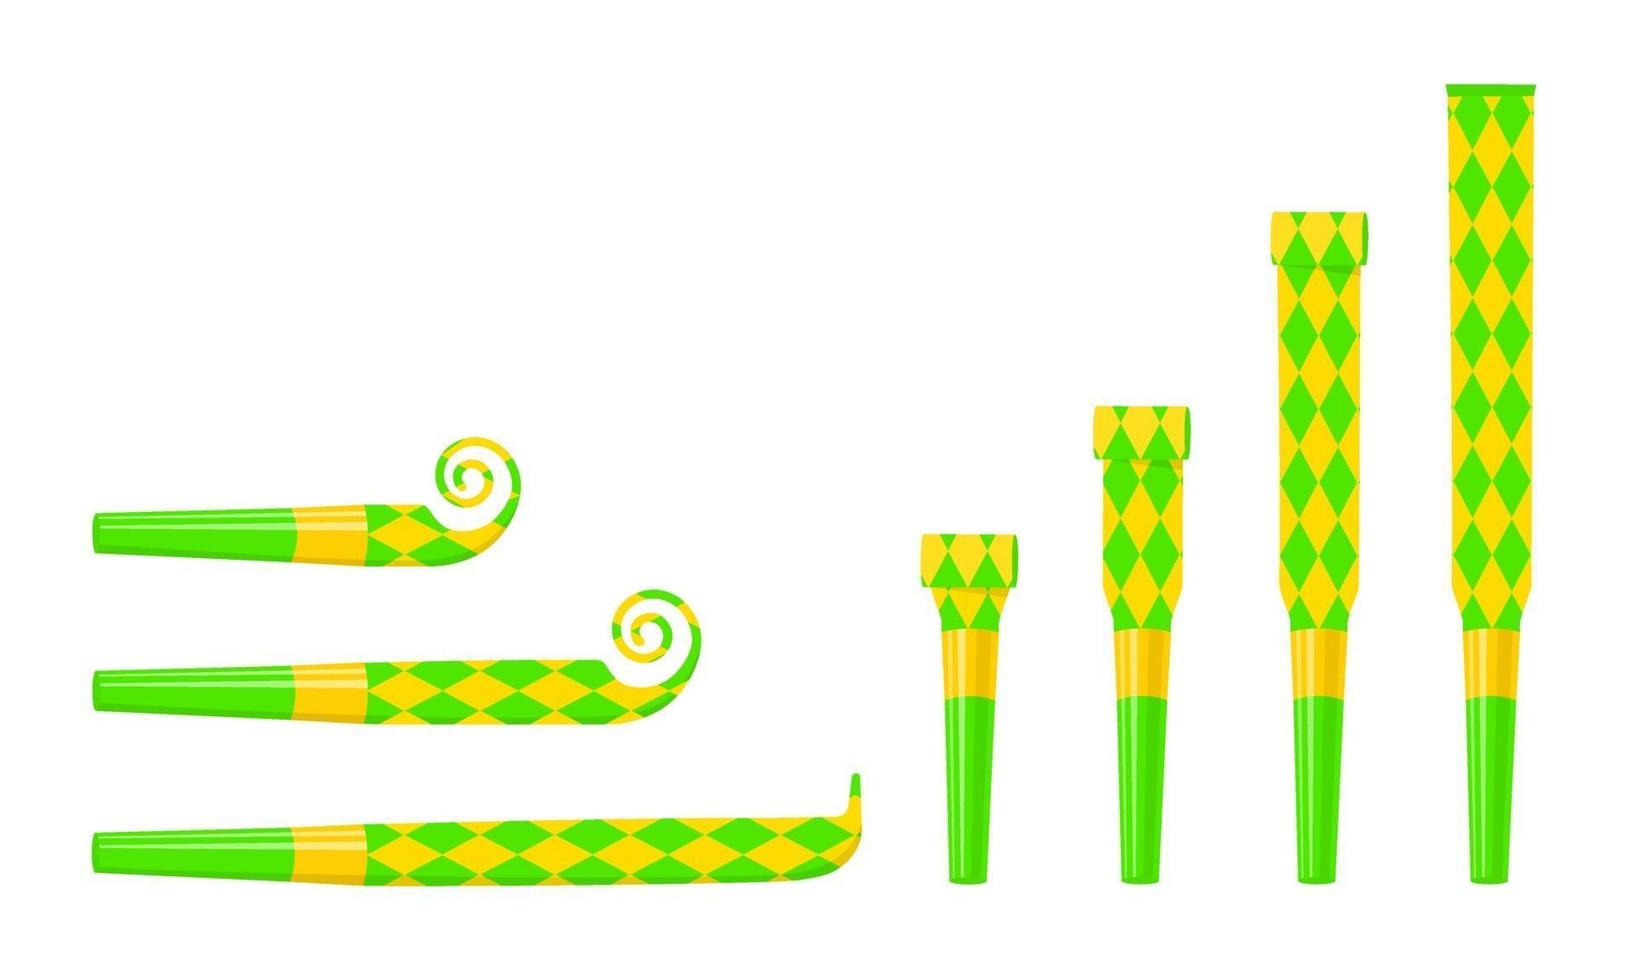 Rolled and unrolled party blowers, horns, noise makers. Green and yellow sound whistles with rhombus pattern isolated on white background. Side and top view vector